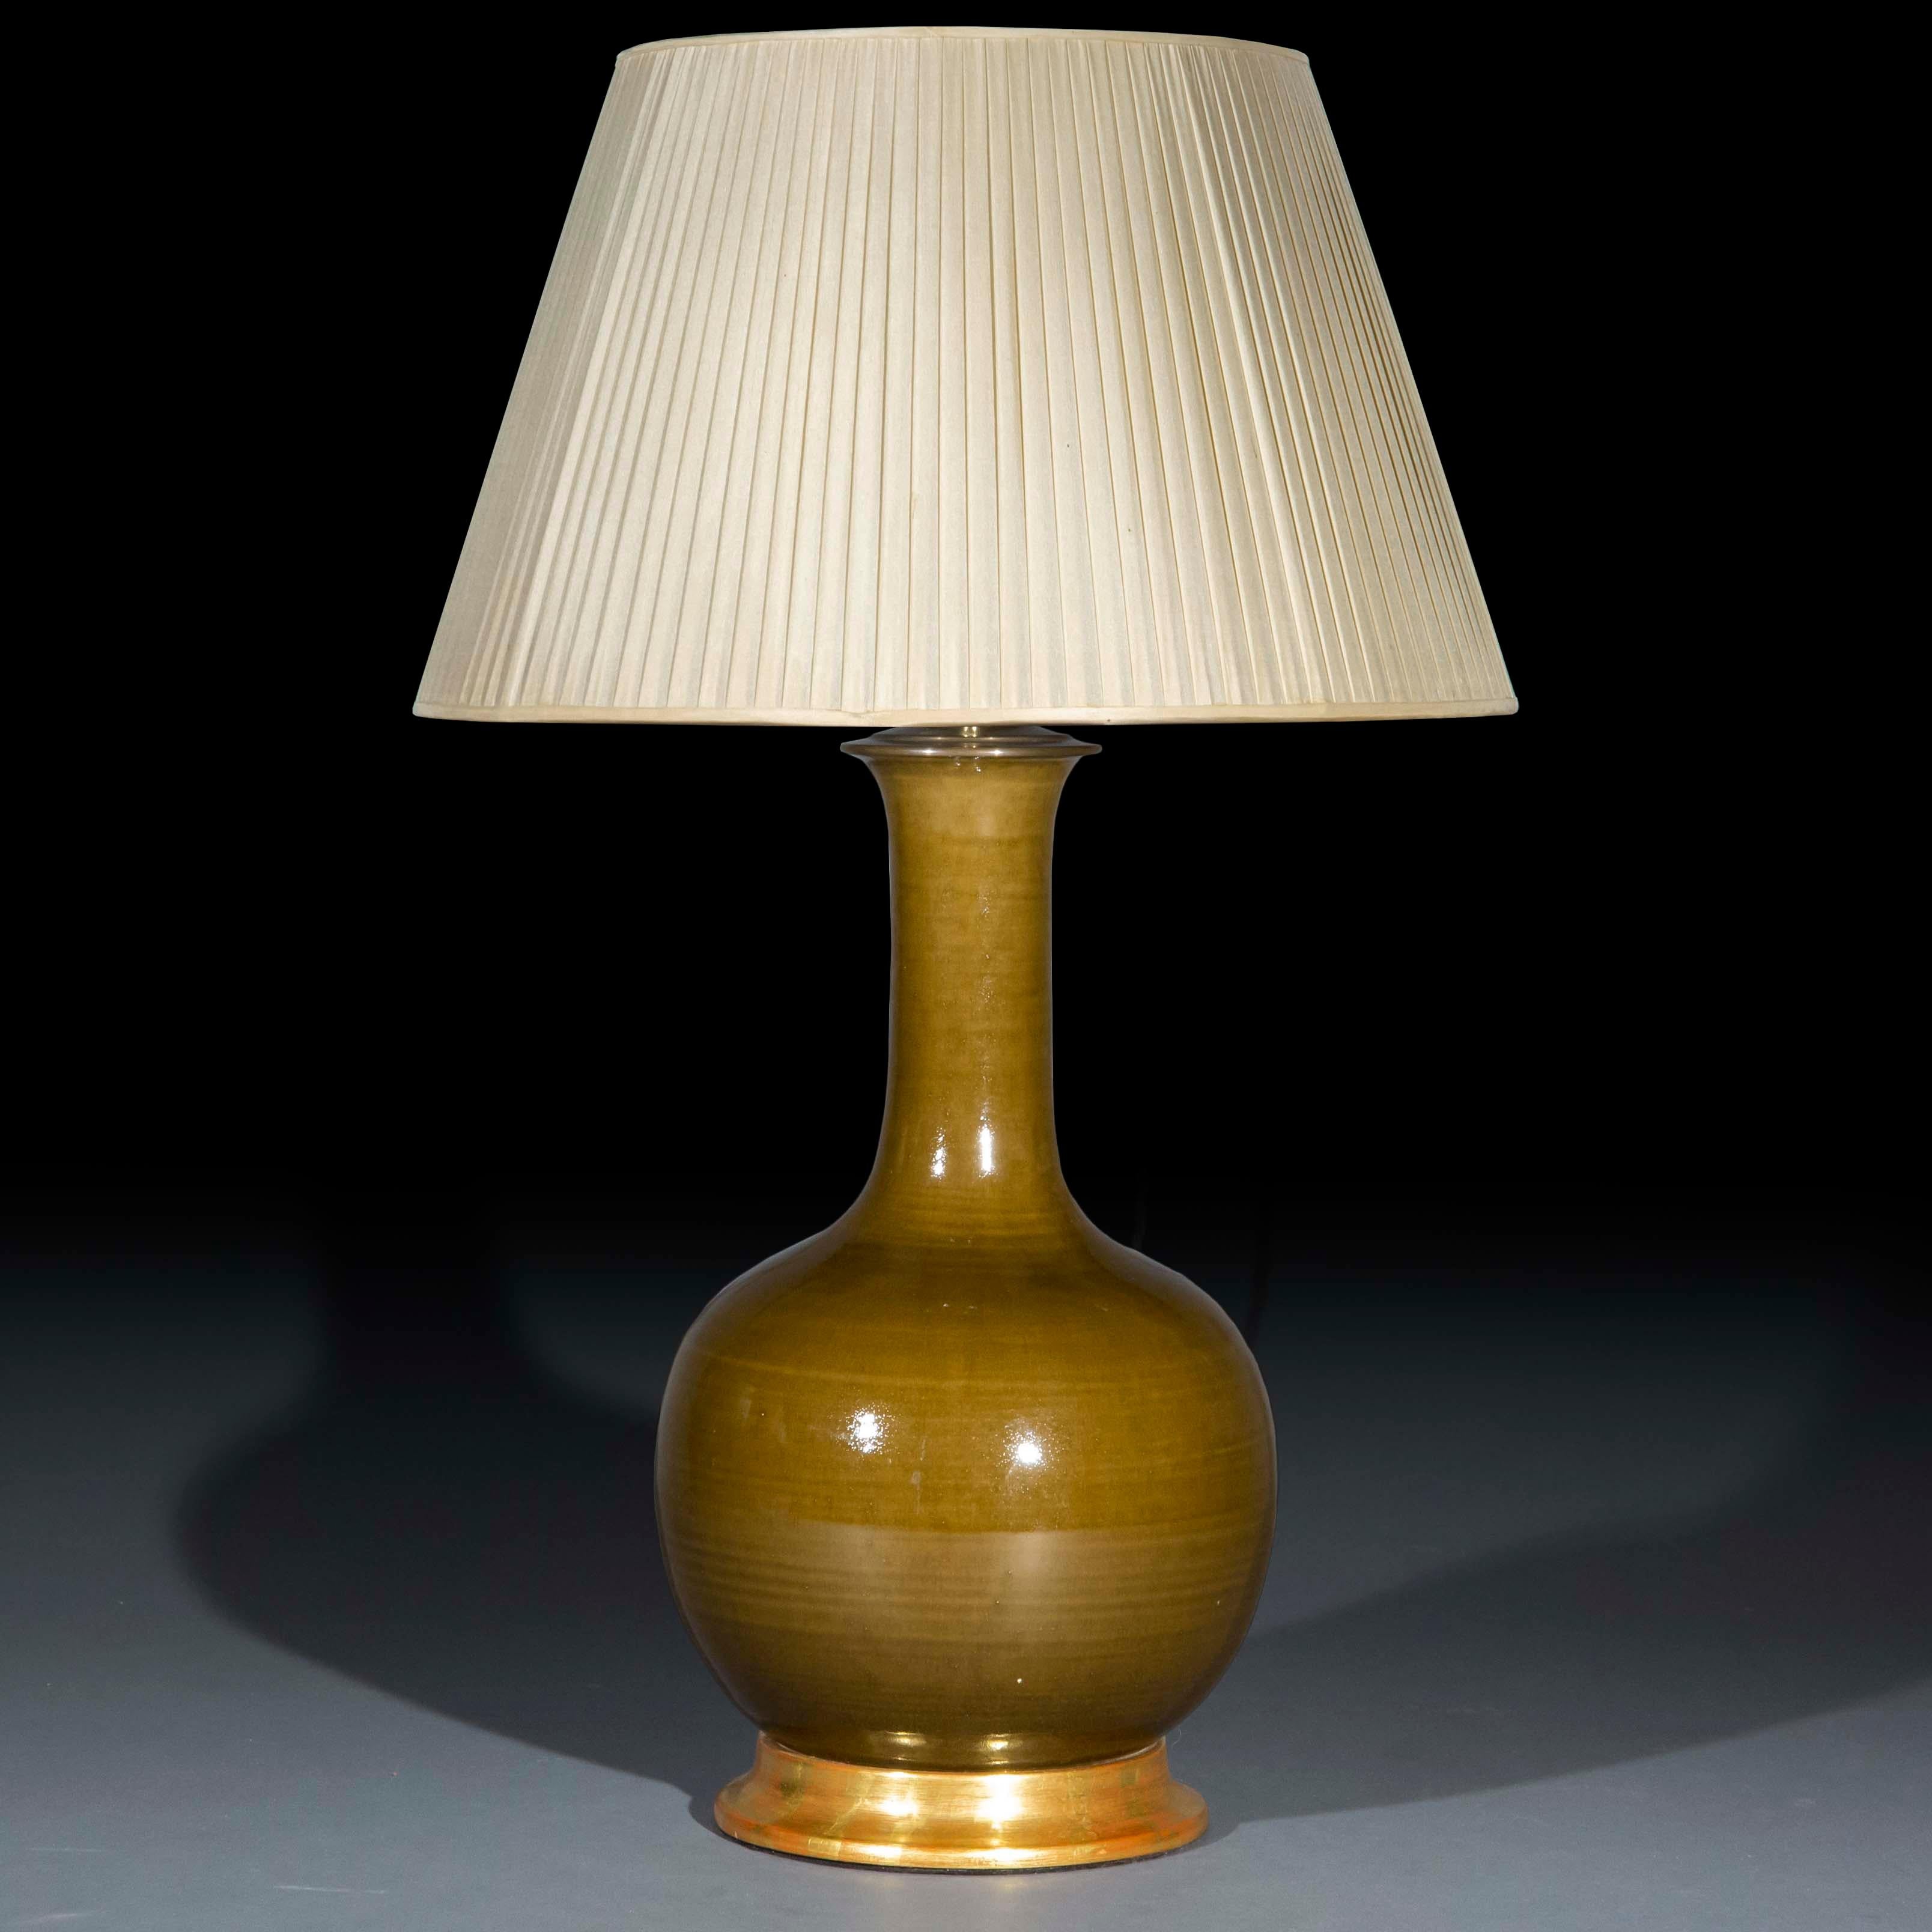 Christopher Spitzmiller's iconic Large Single Gourd lamp of large proportions, in the style of Chinese Ming dynasty vases. Entirely handmade in Christopher Spitzmiller's New York studio, on a 23k gold water-gilt base, with brass double socket